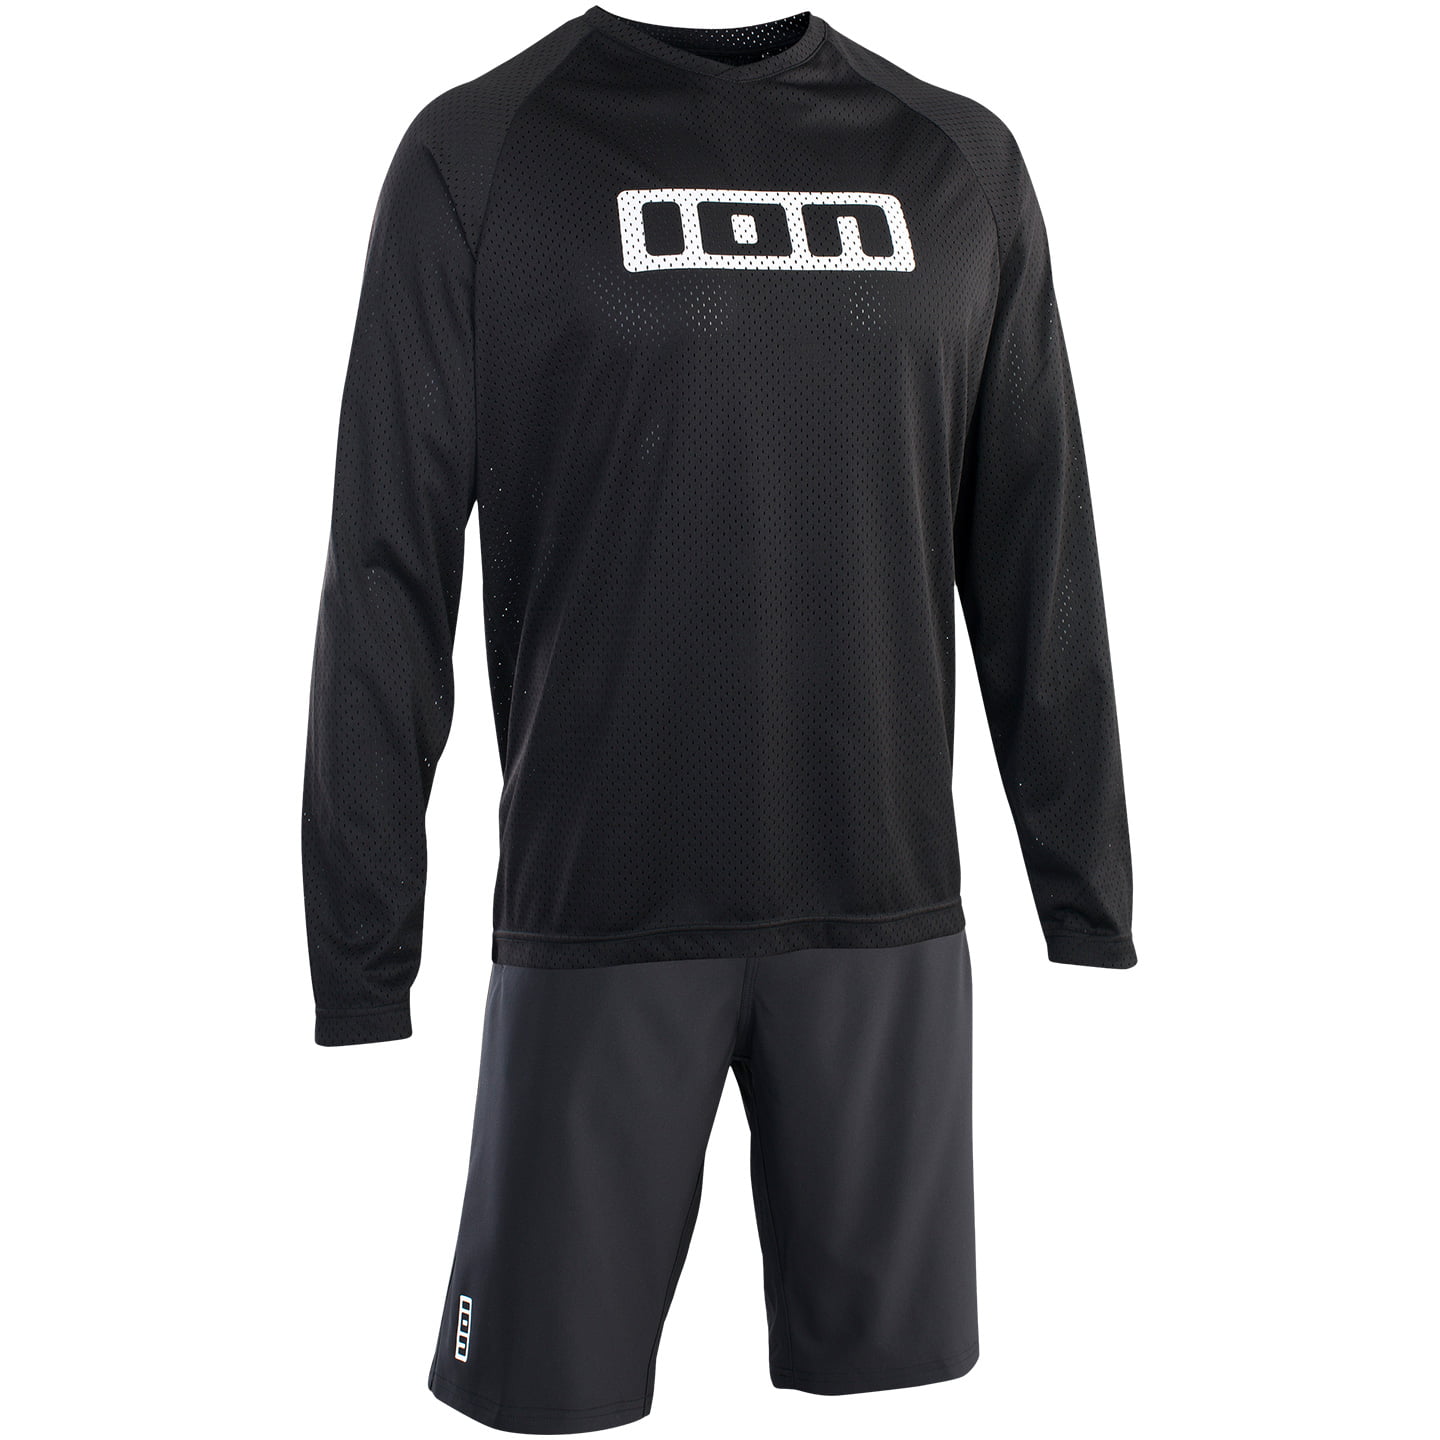 ION Logo Set (cycling jersey + cycling shorts) Set (2 pieces), for men